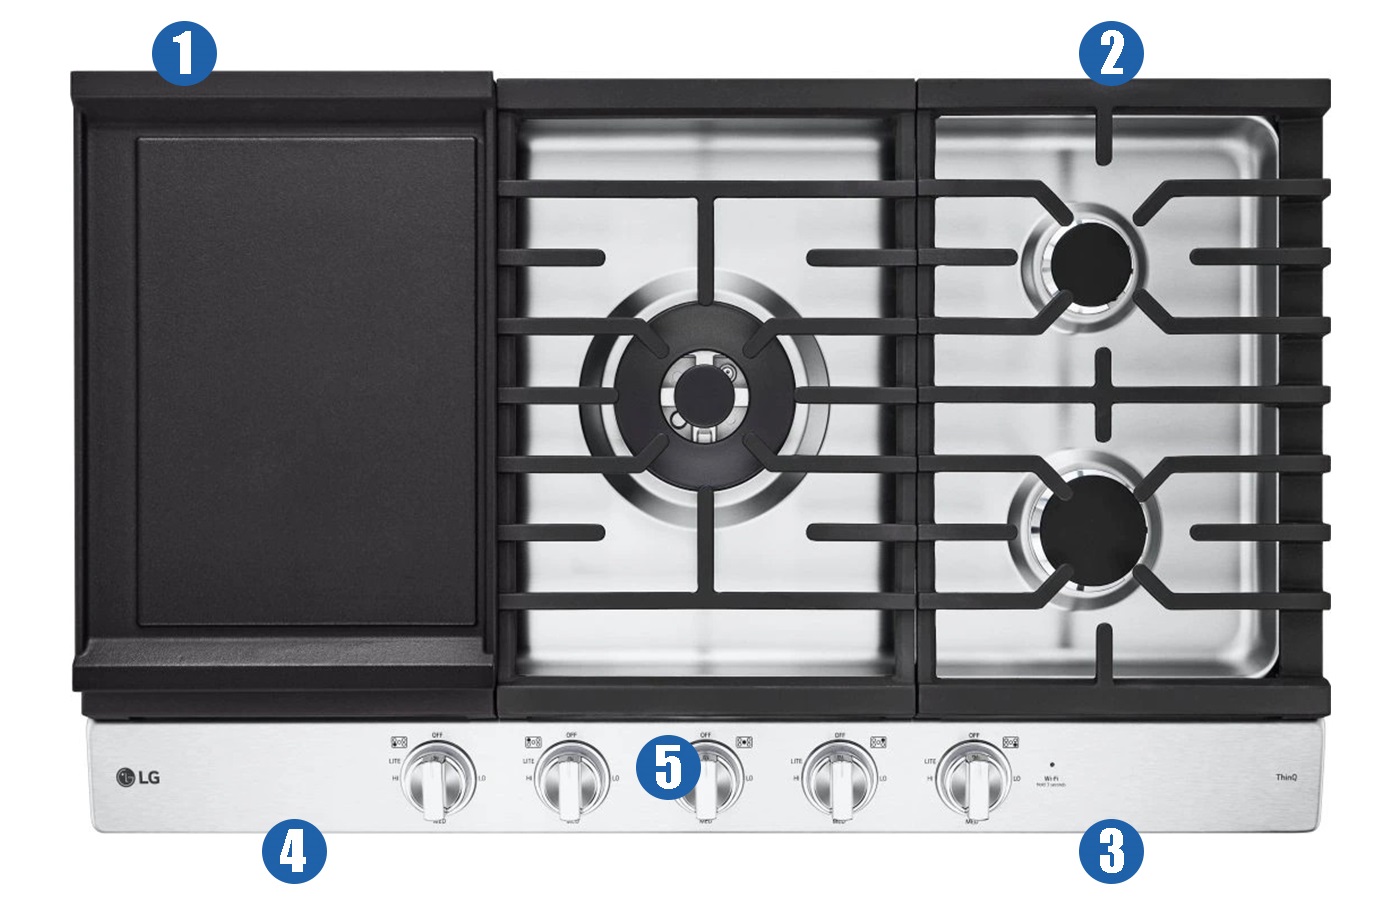 Locating the Model Number on a Cooktop